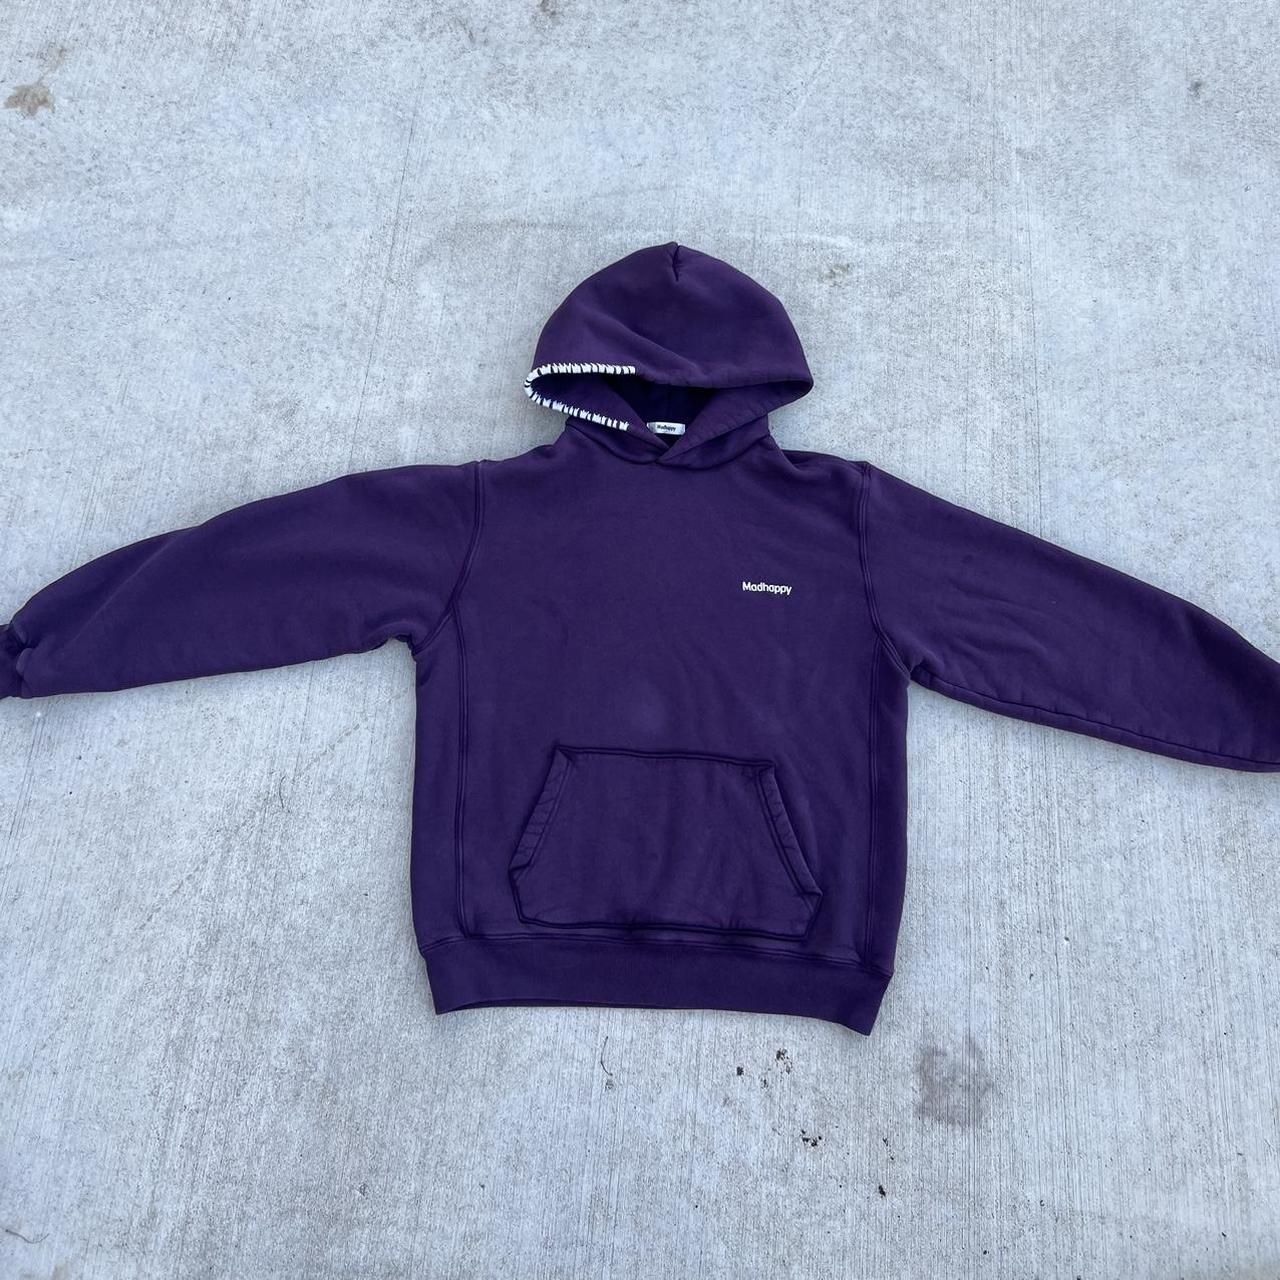 PURPLE MADHAPPY HOODIE RARE COLOR SIZE M has a... - Depop